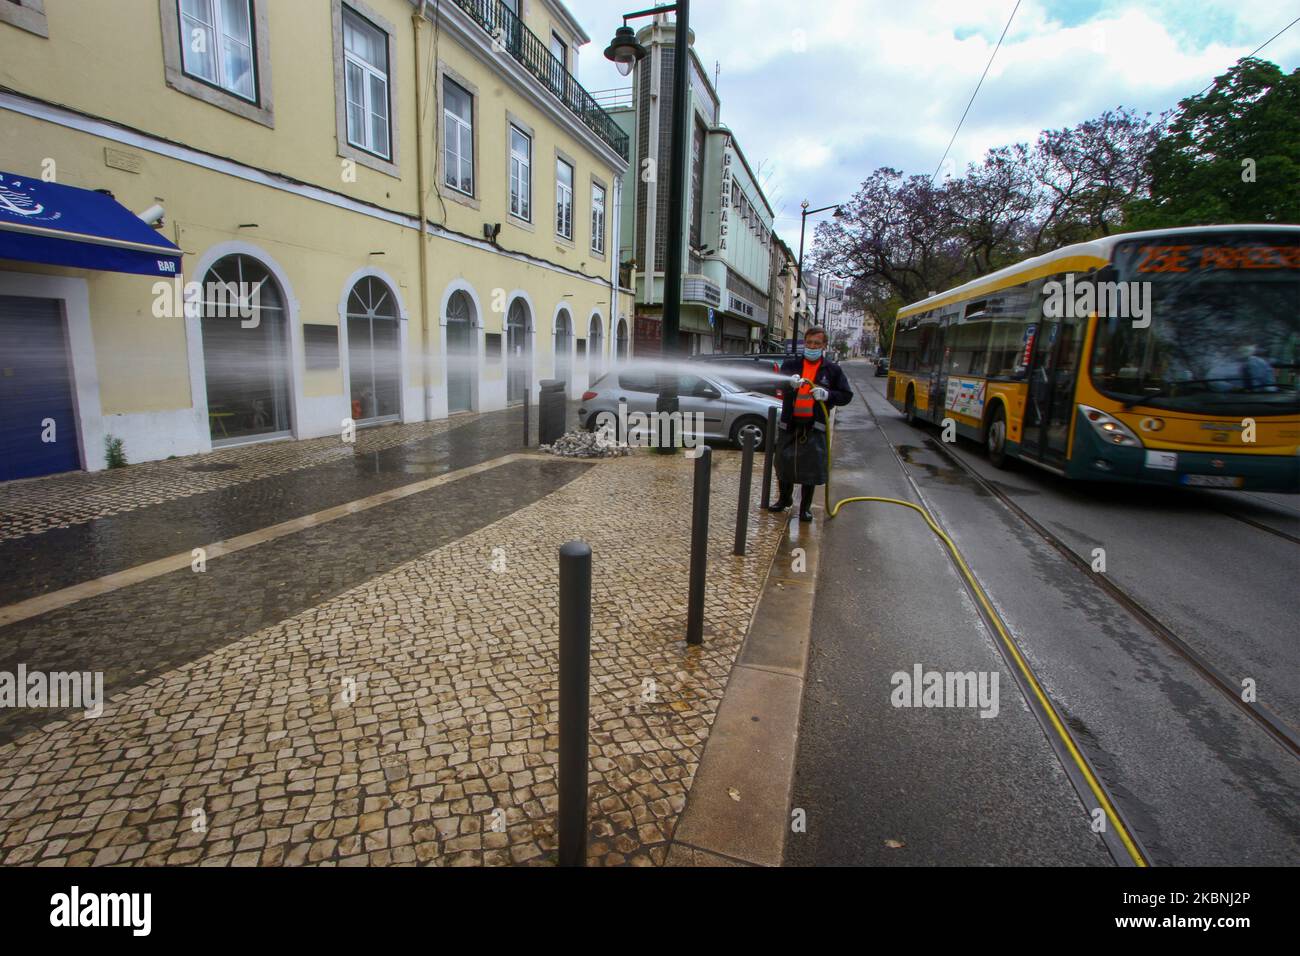 An Urban Hygiene team washes with sodium hypochlorite the streets of the Estrela district in Lisbon considered most critical such as heavily populated and tourist areas, also those associated with transport interfaces, restaurants and other commercial outlets. 10 May, 2020. Despite the lifting of the emergency measures which limited the free transit and the imposition of an obligatory quarantine, the institutions belonging to the Portuguese government continue to carry out their projects to support the citizen in the face of the advance of the COVID-19. The Estrela Community Council has been a Stock Photo